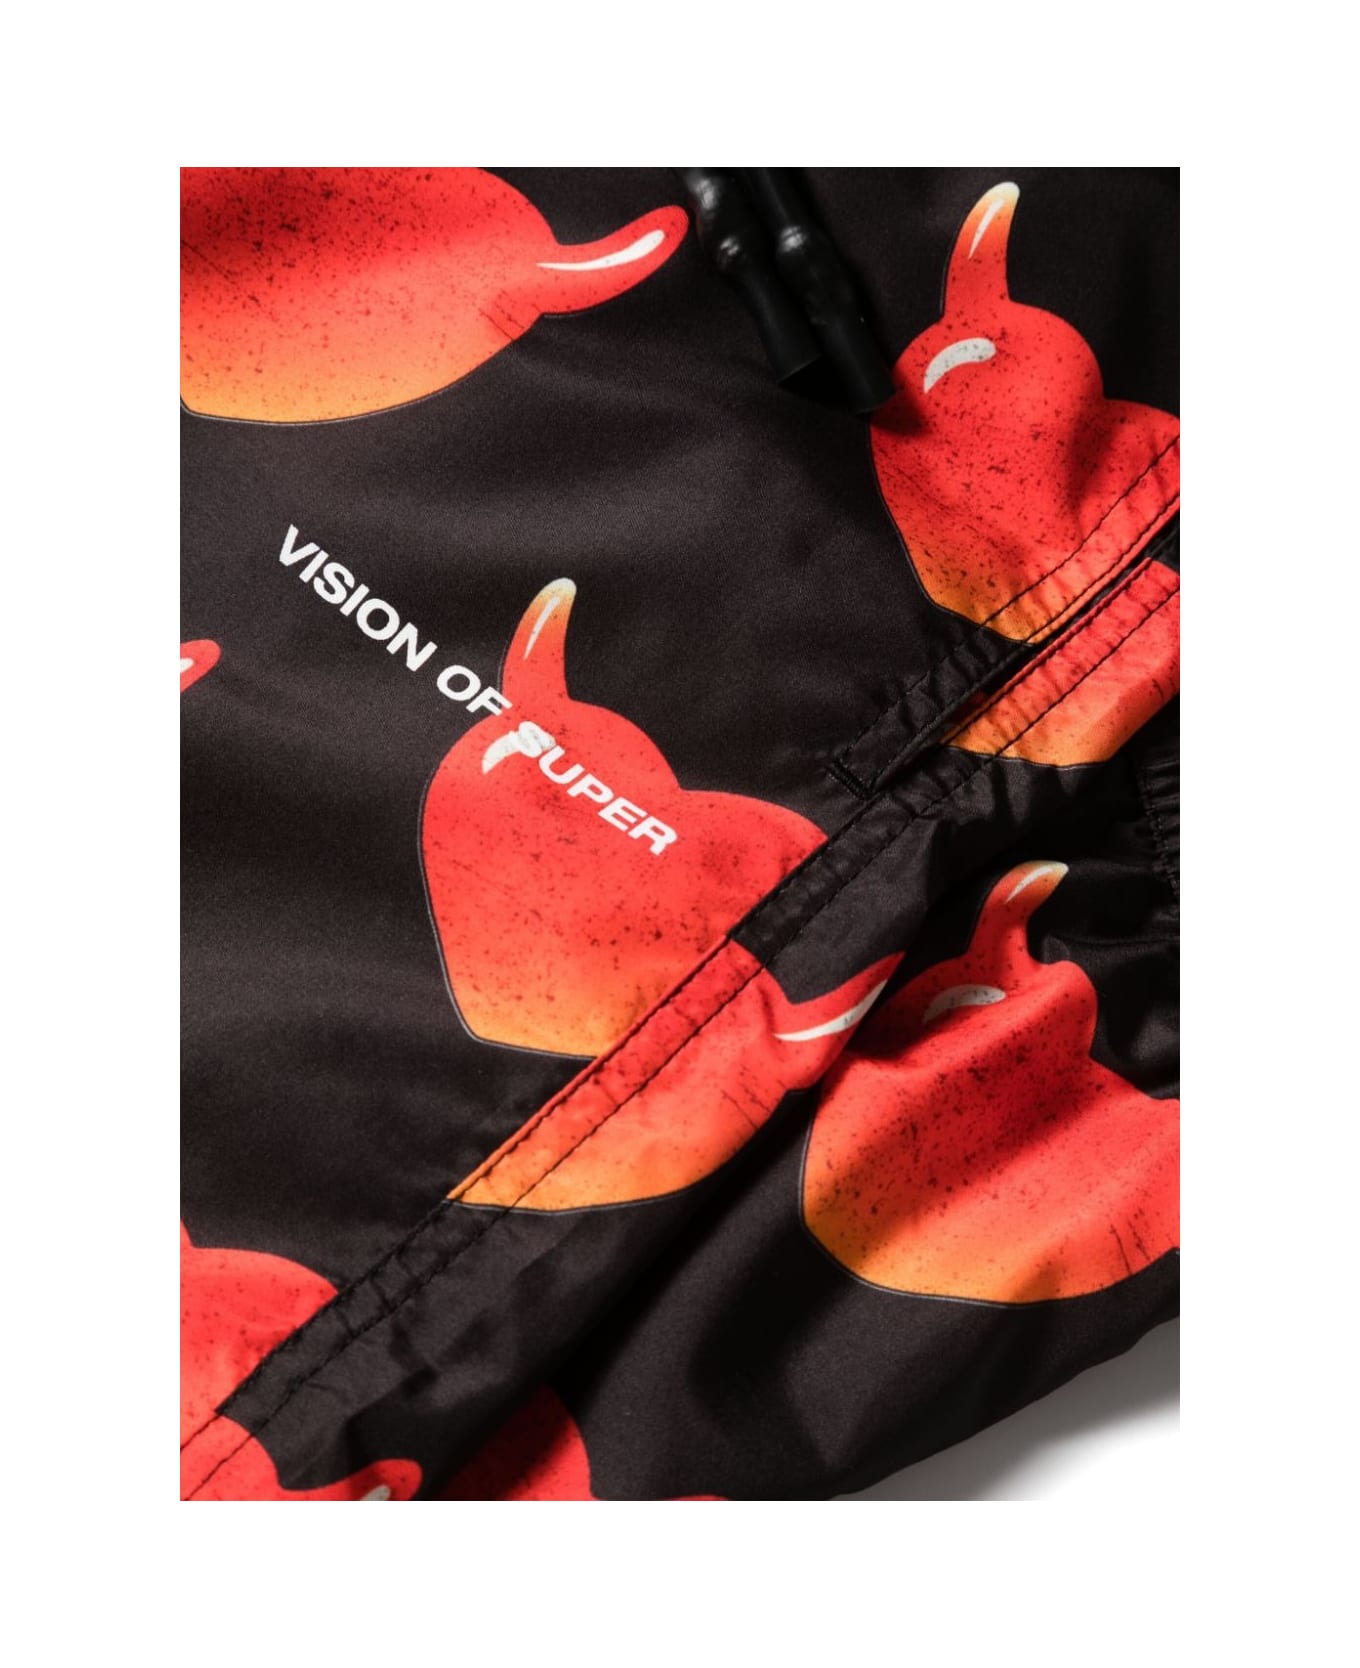 Vision of Super Black Swimwear With All-over Vos Hearts - Black